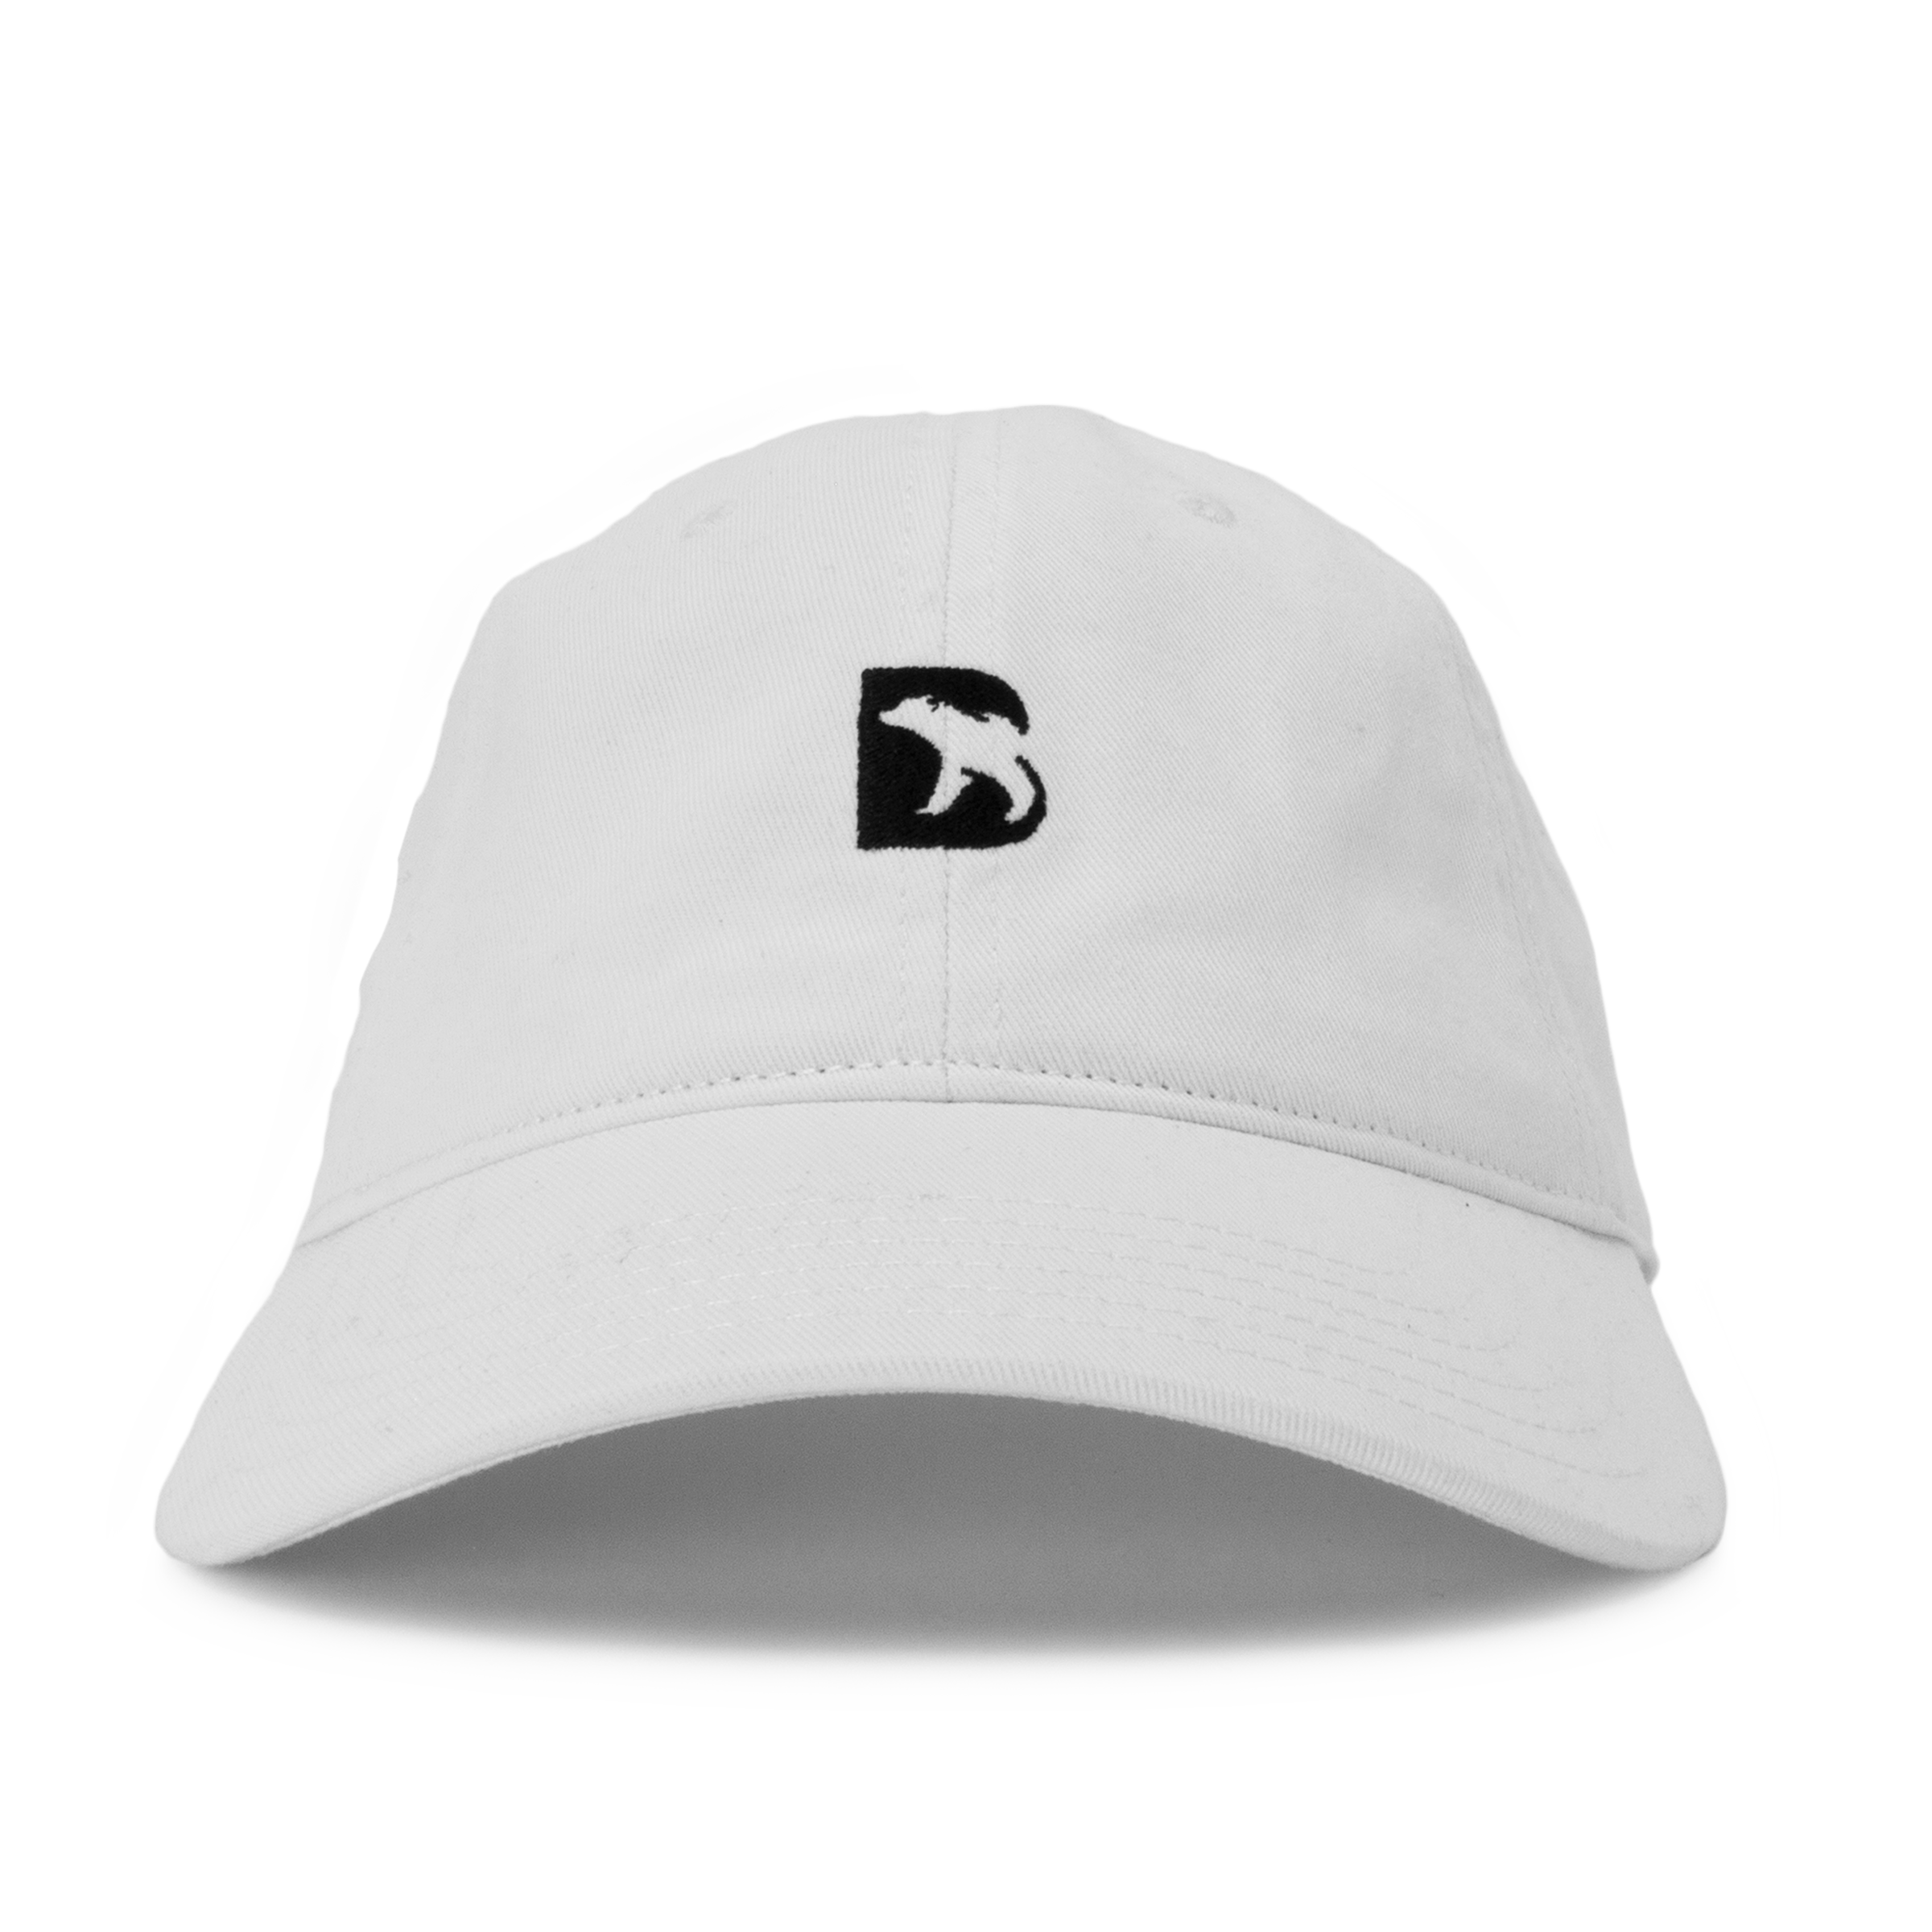 Bearbottom Dad Hat White front with embroidered black B logo